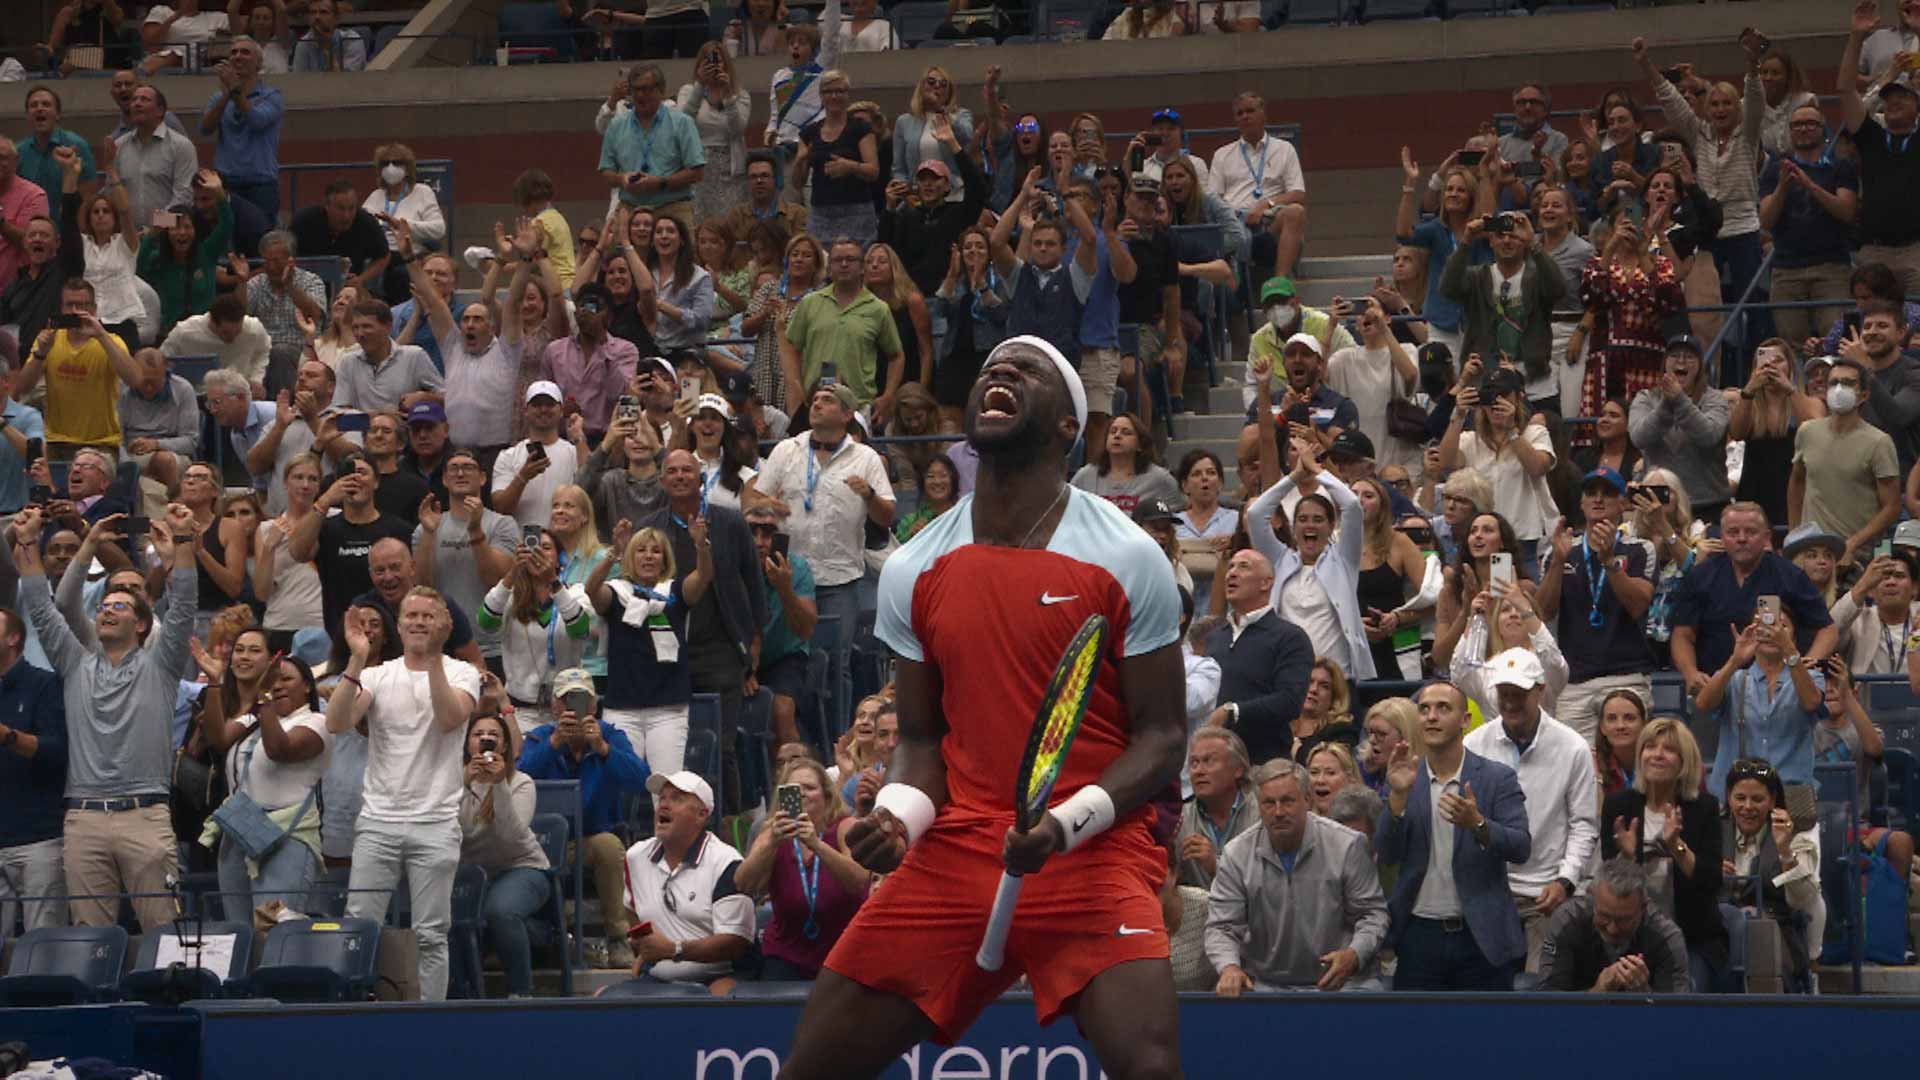 Frances Tiafoe is among the players who will appear in Season 1, Part 2 of Netflix's Break Point.